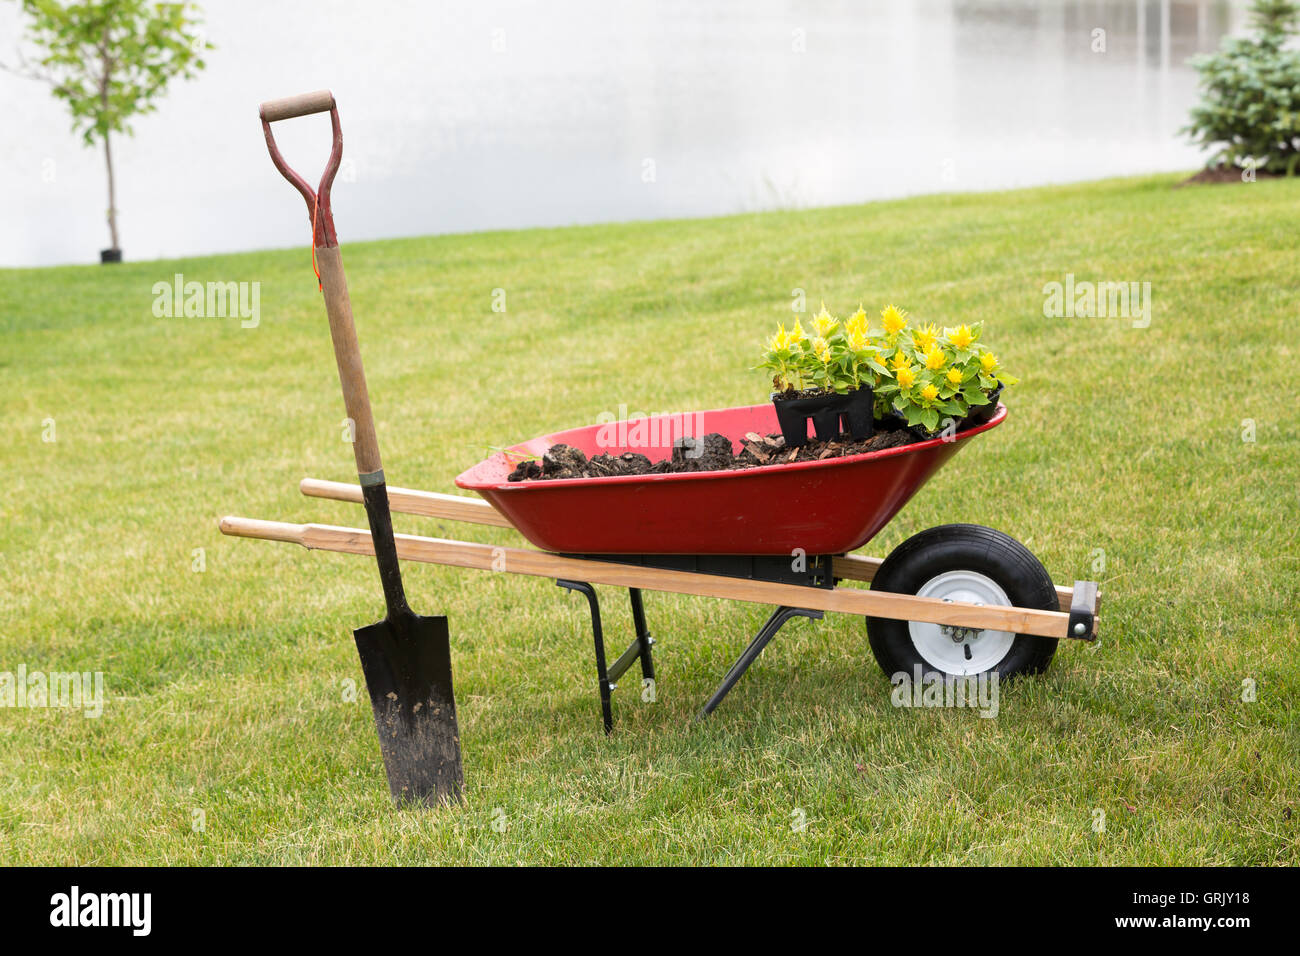 Wheelbarrow with seedlings and a spade standing on a manicured green grassy lawn at the edge of a lake during spring planting an Stock Photo